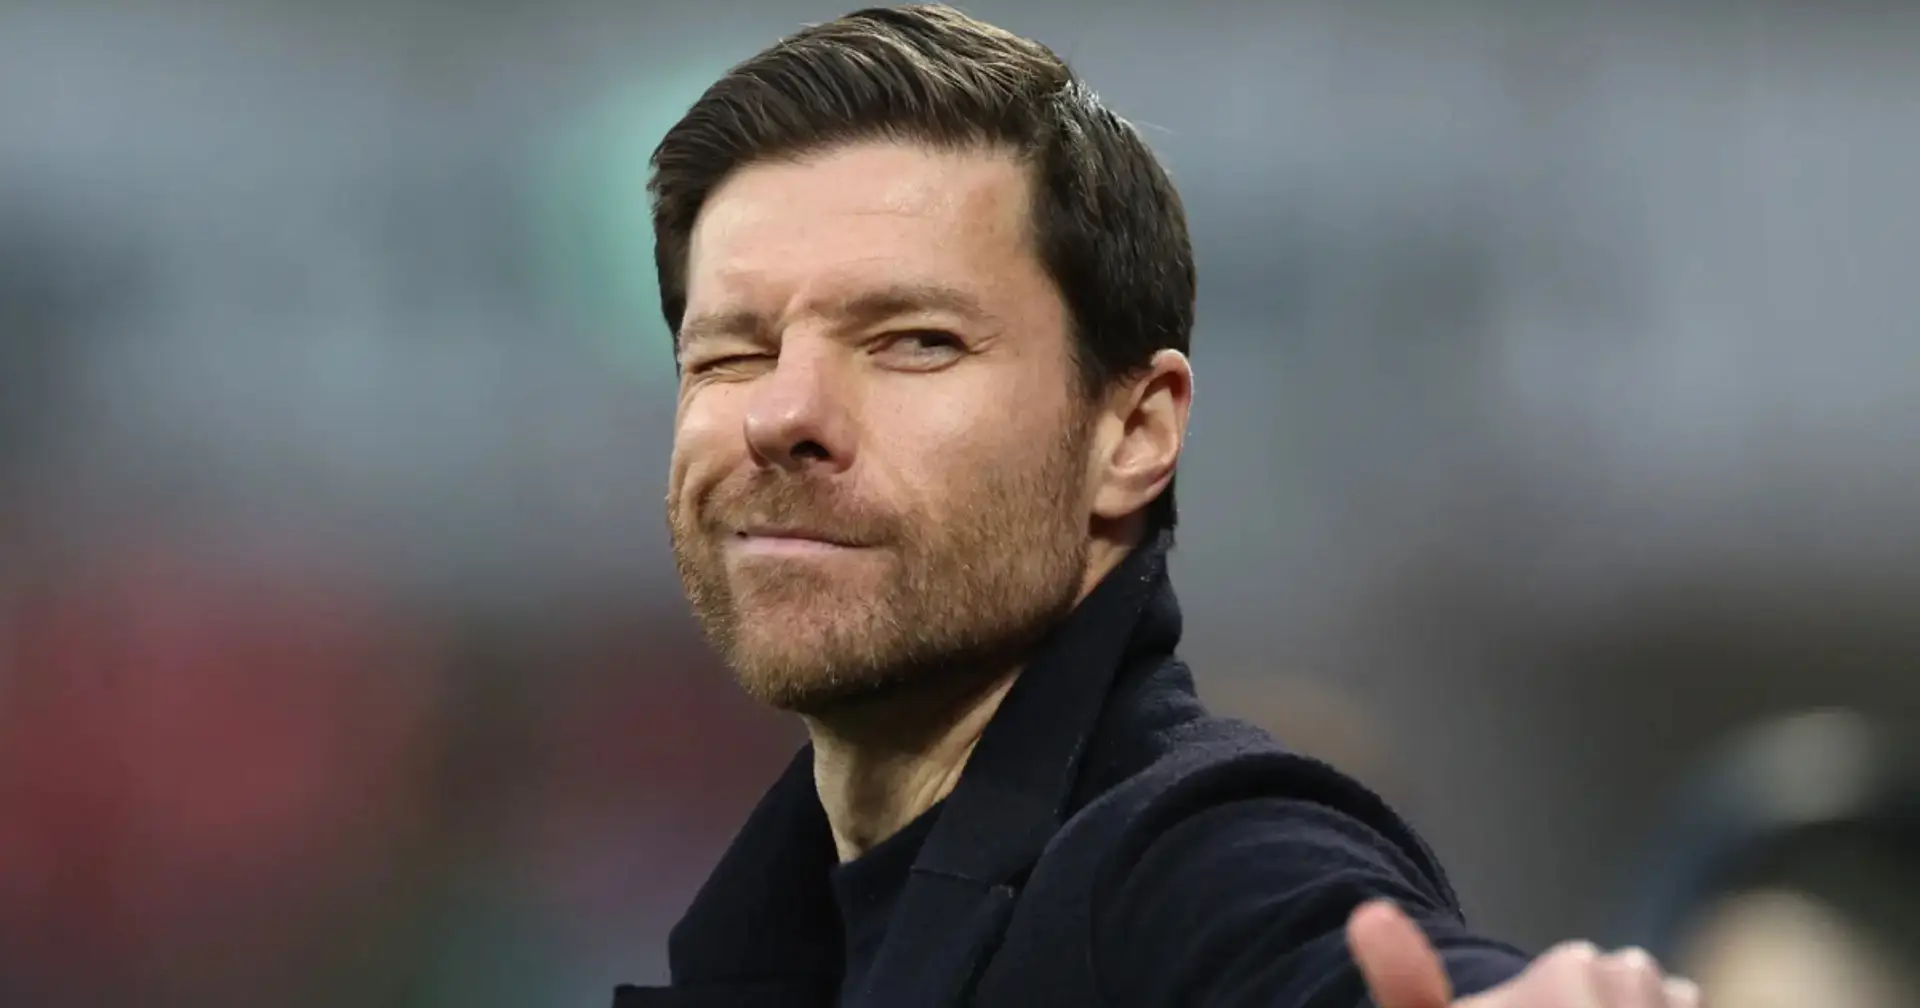 Liverpool move a 'big dream' for Xabi Alonso & more big stories you might've missed